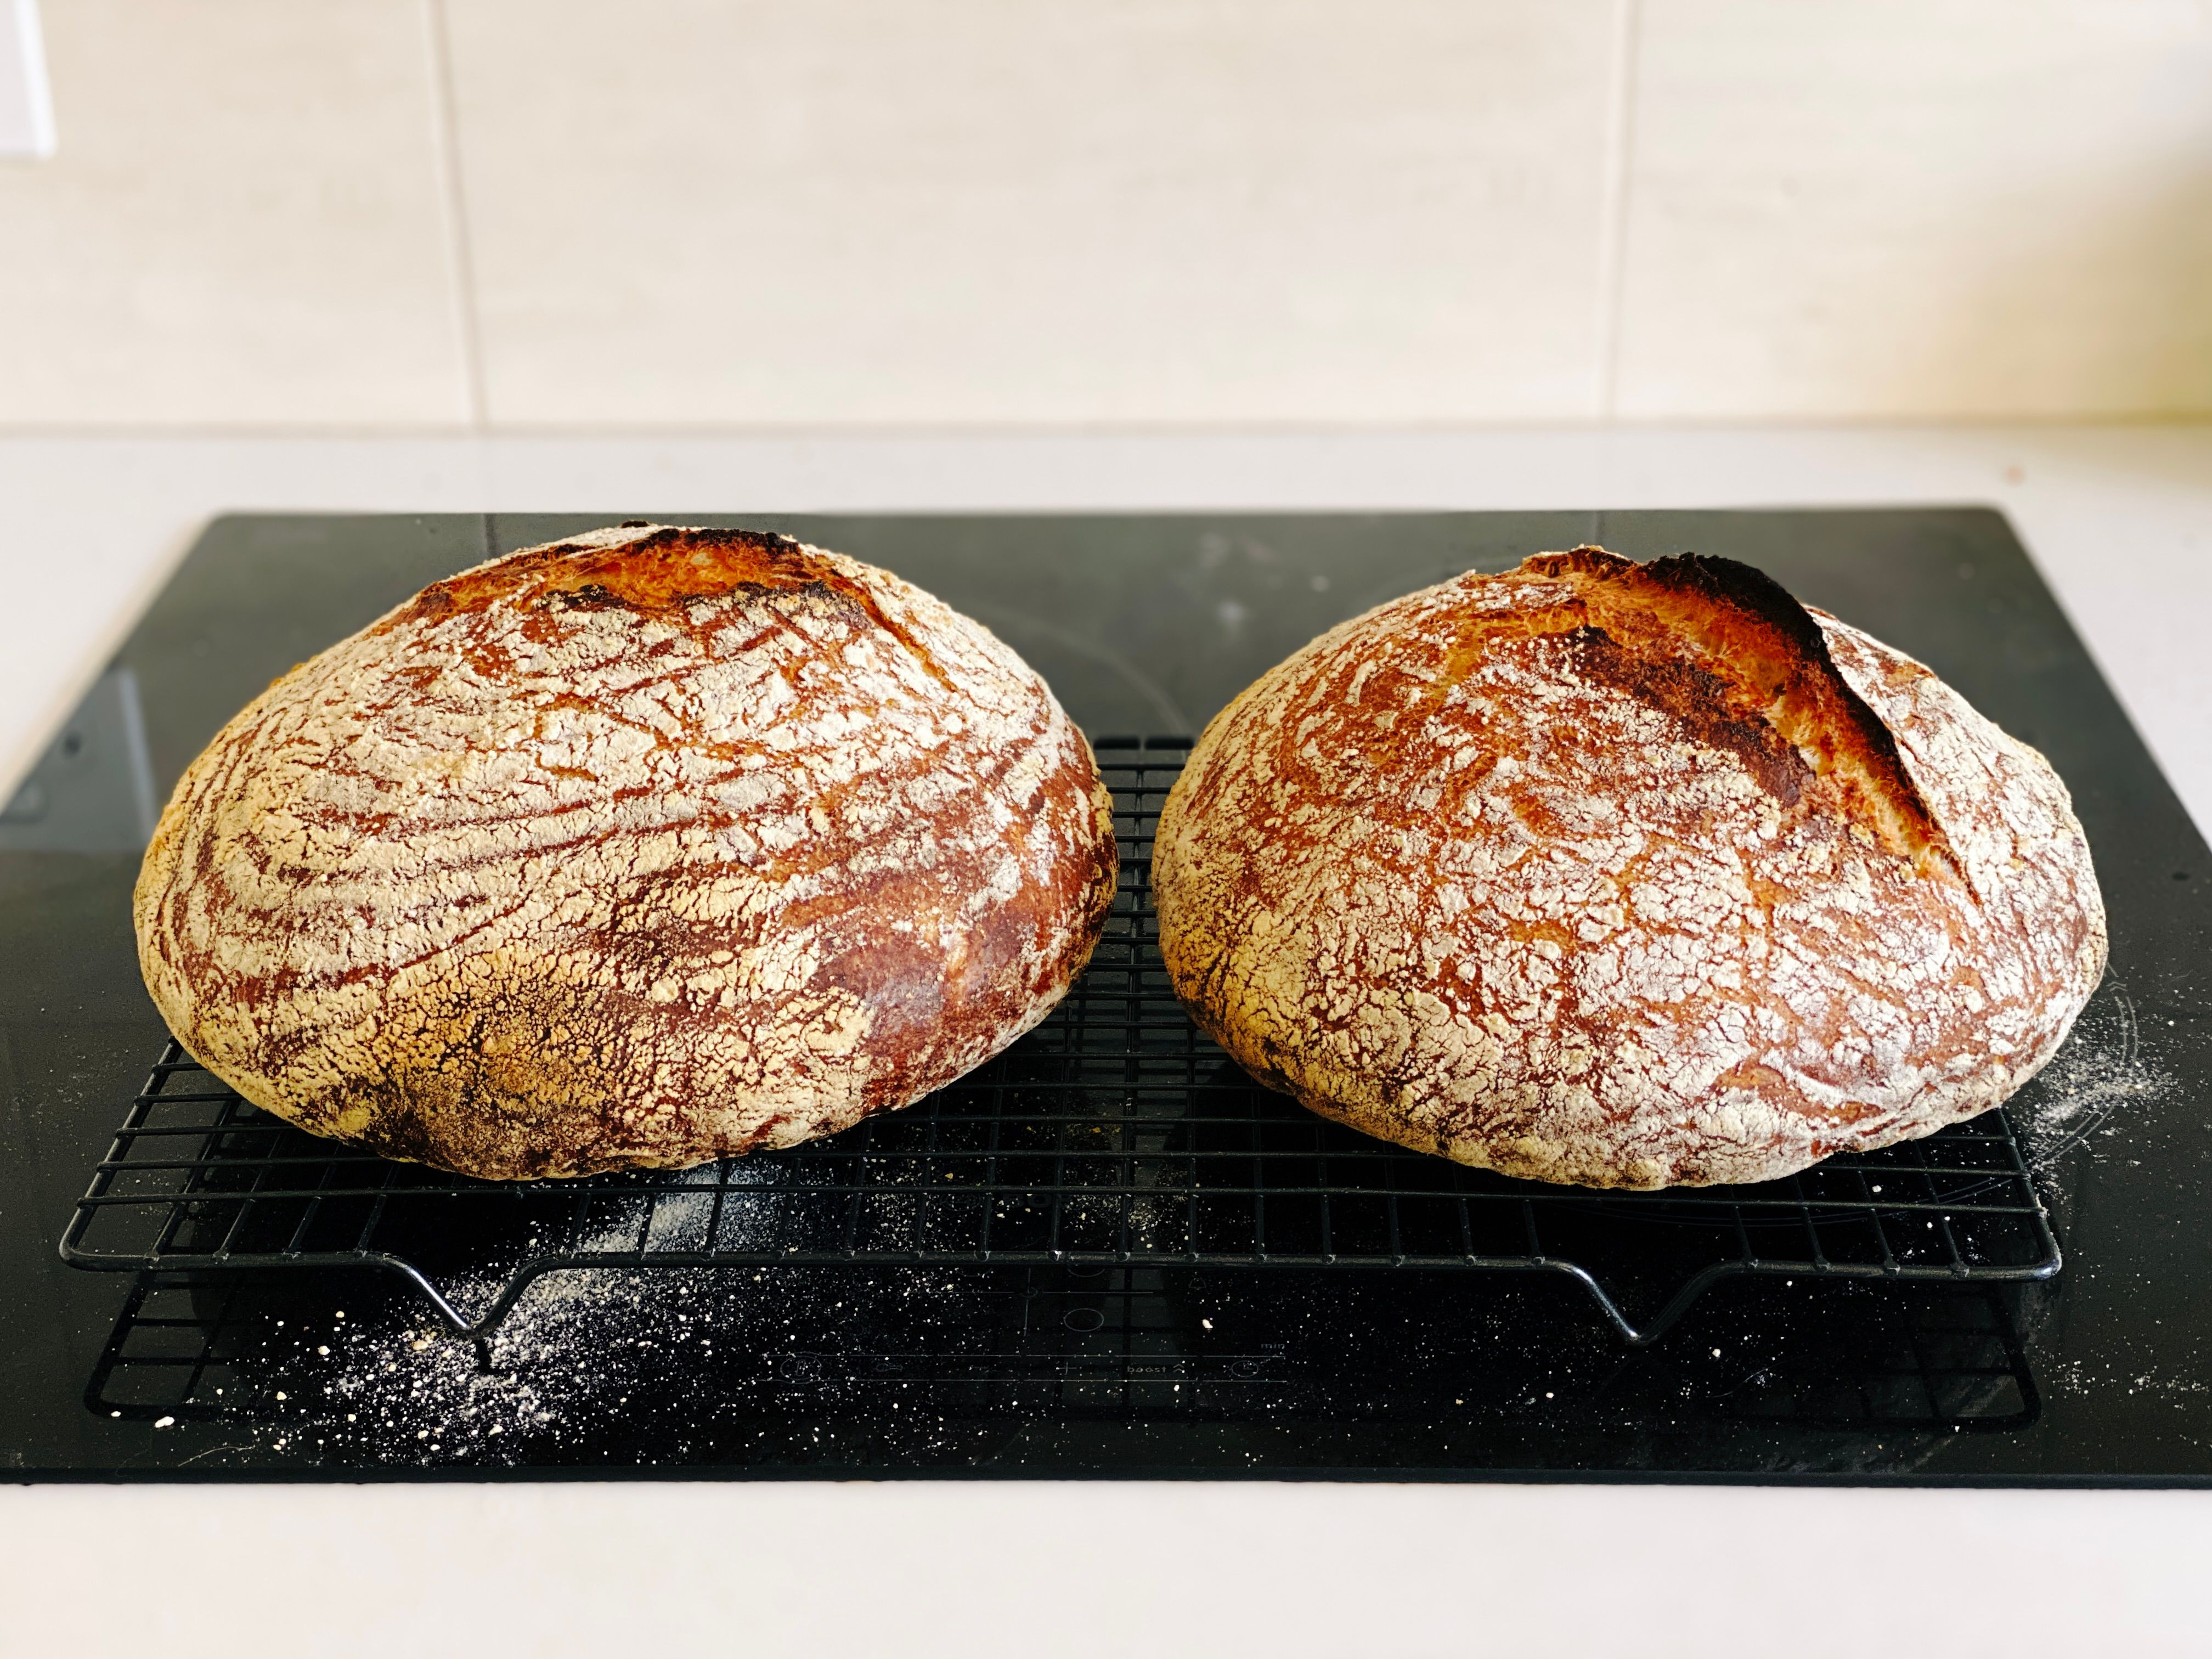 Two round golden brown loaves of bread covered in flour sitting on a cooling rack.